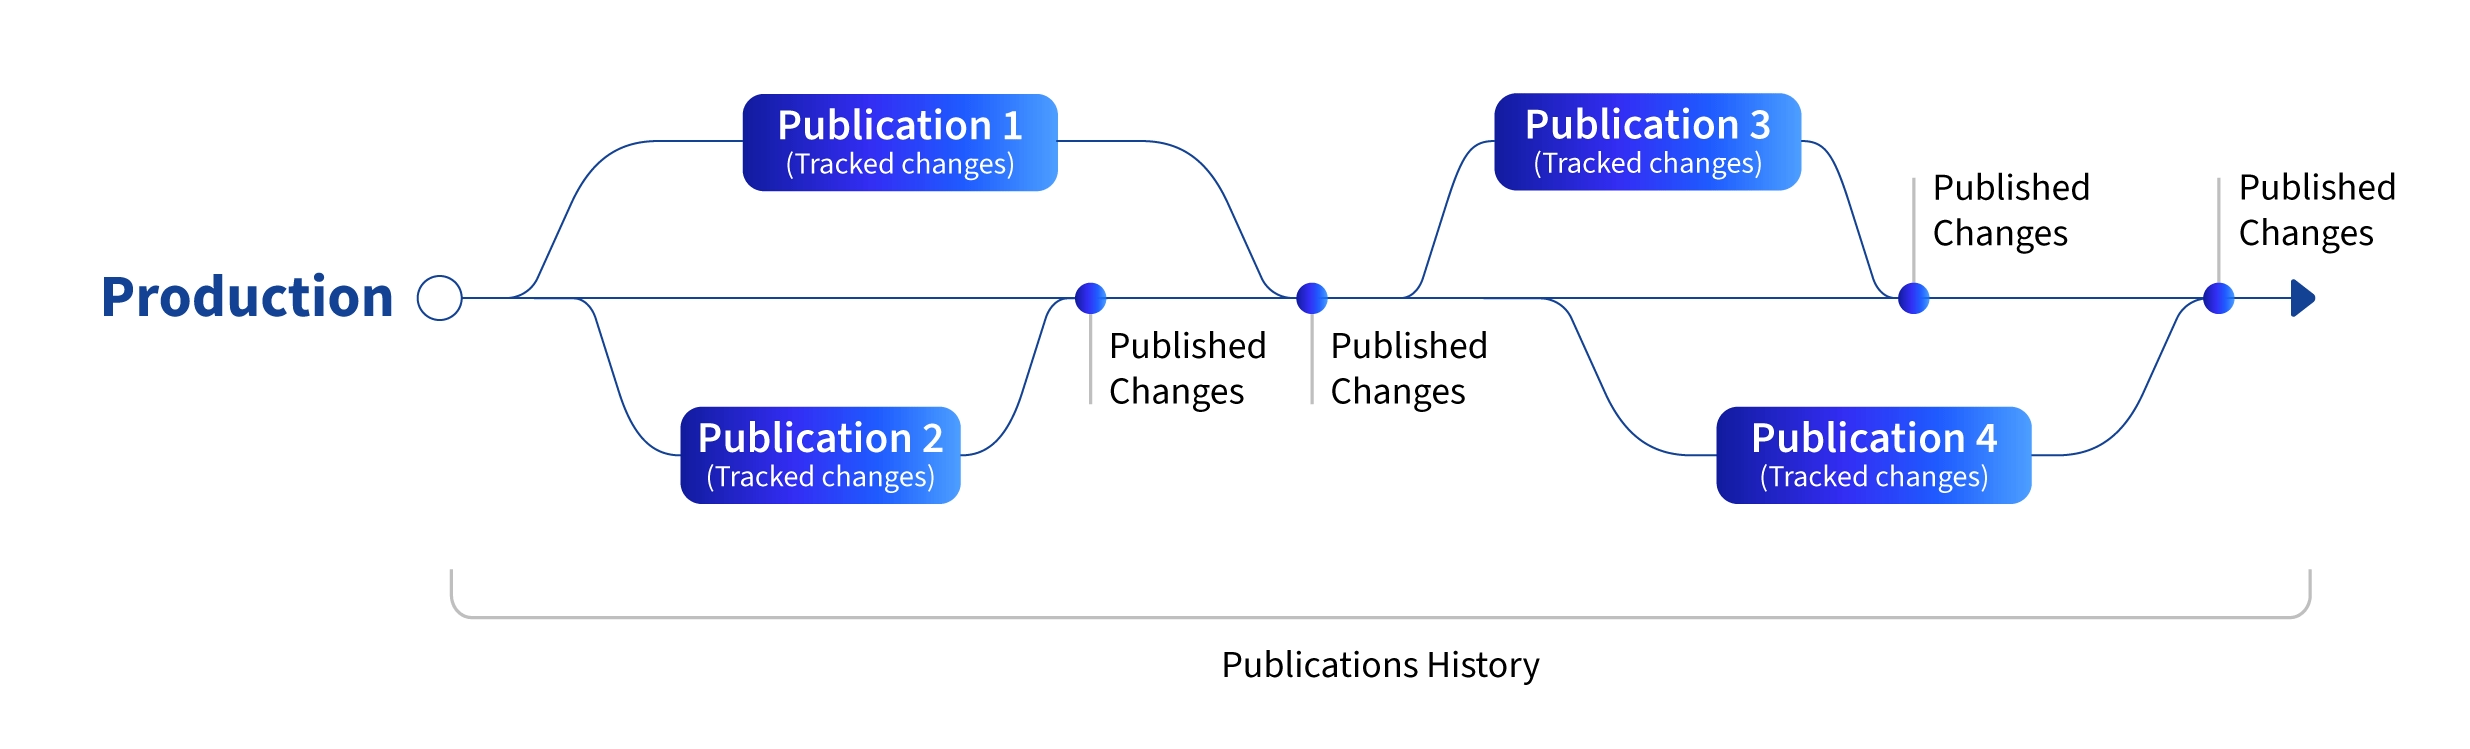 Create, view and manage publications via the Publications overview Page.